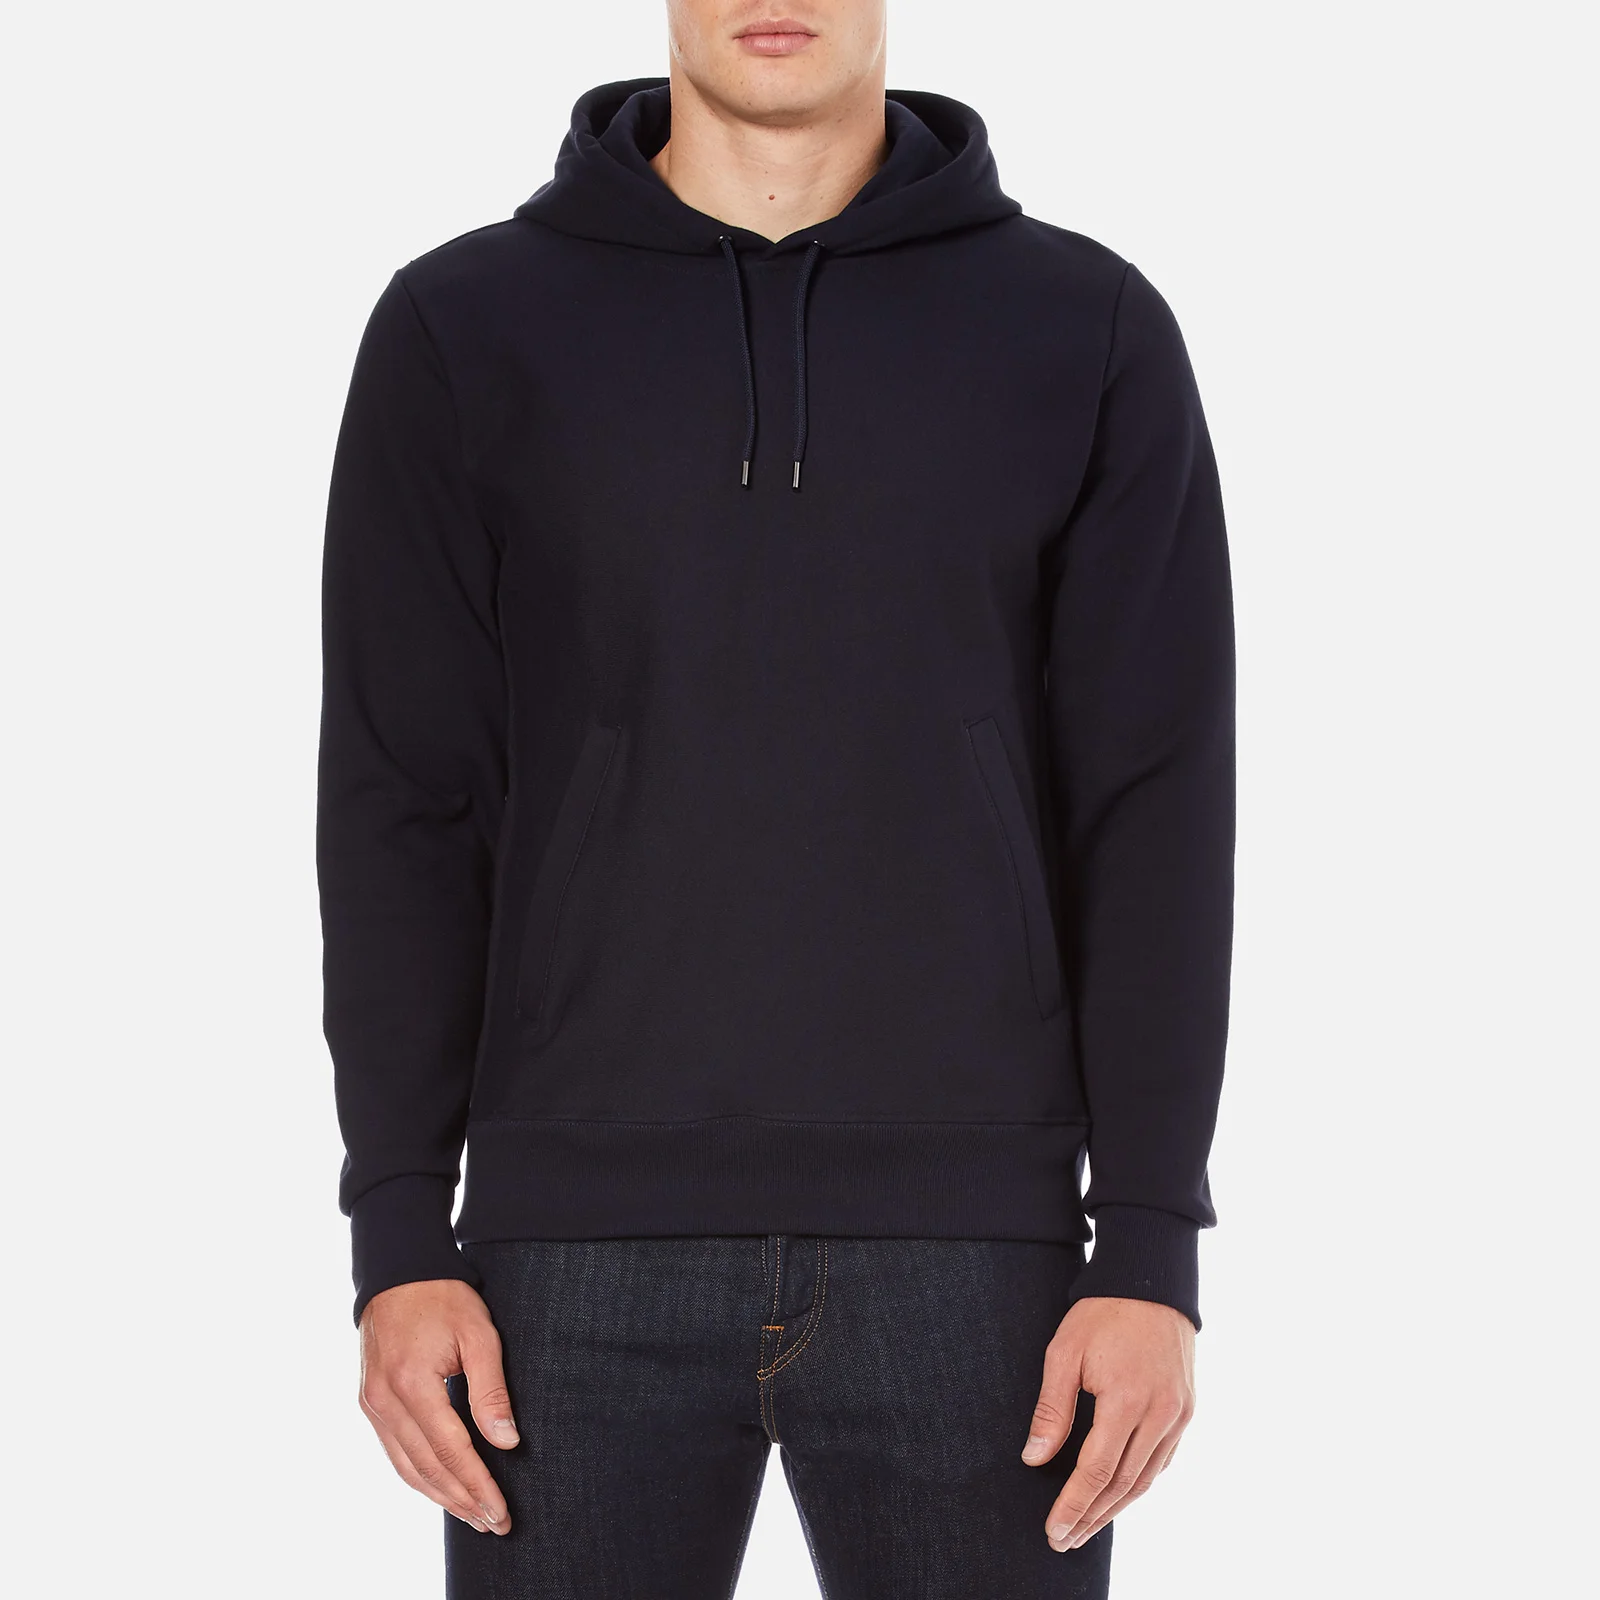 PS by Paul Smith Men's Overhead Hoody - Navy Image 1